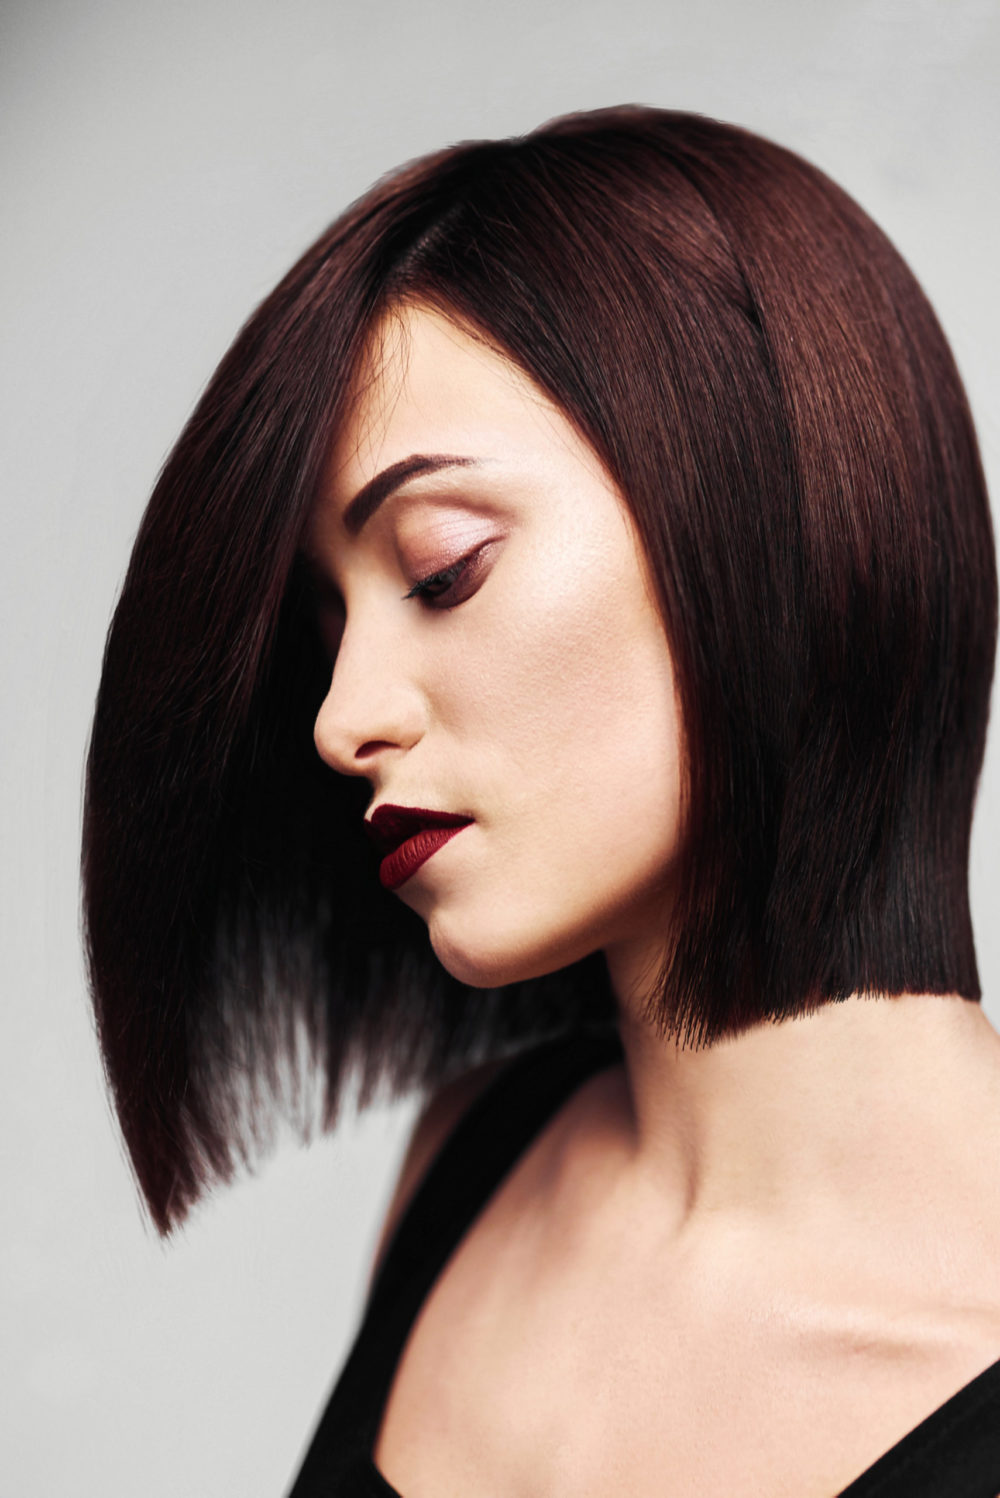 Midi Blunt Bob, a great short hairstyle for chubby faces